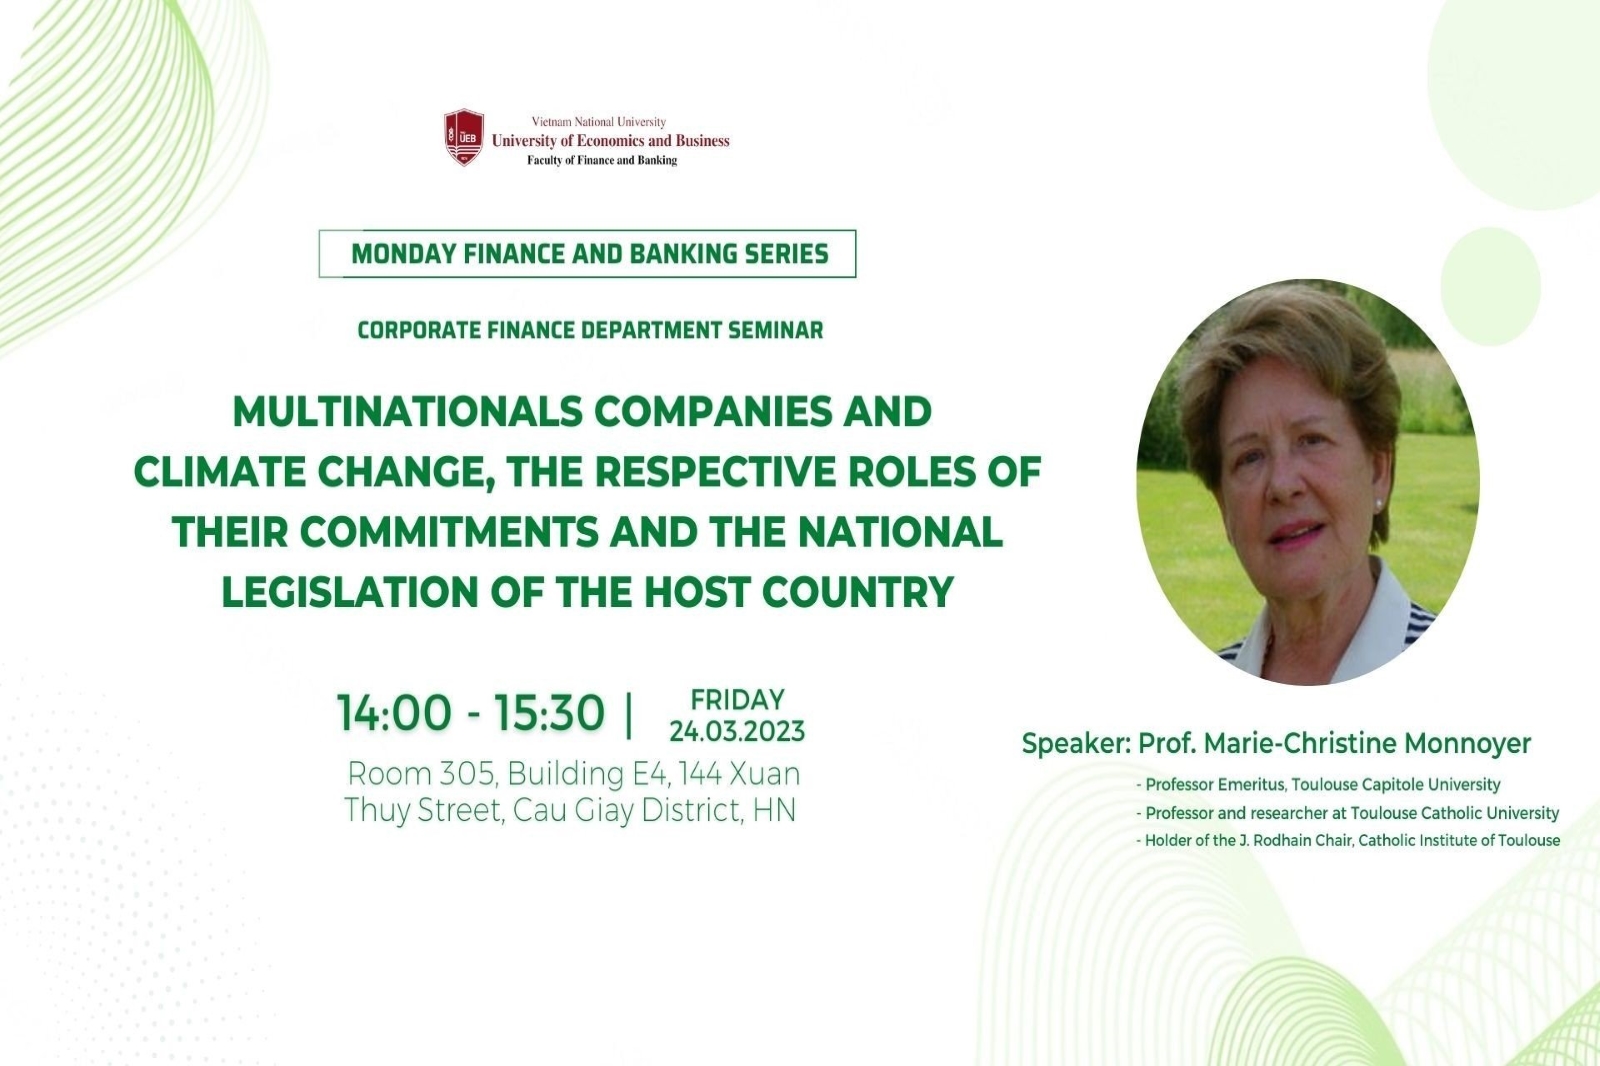 Thư mời tham dự Seminar - Multinationals companies and climate change, the respective roles of their commitments and the national legislation of the host country